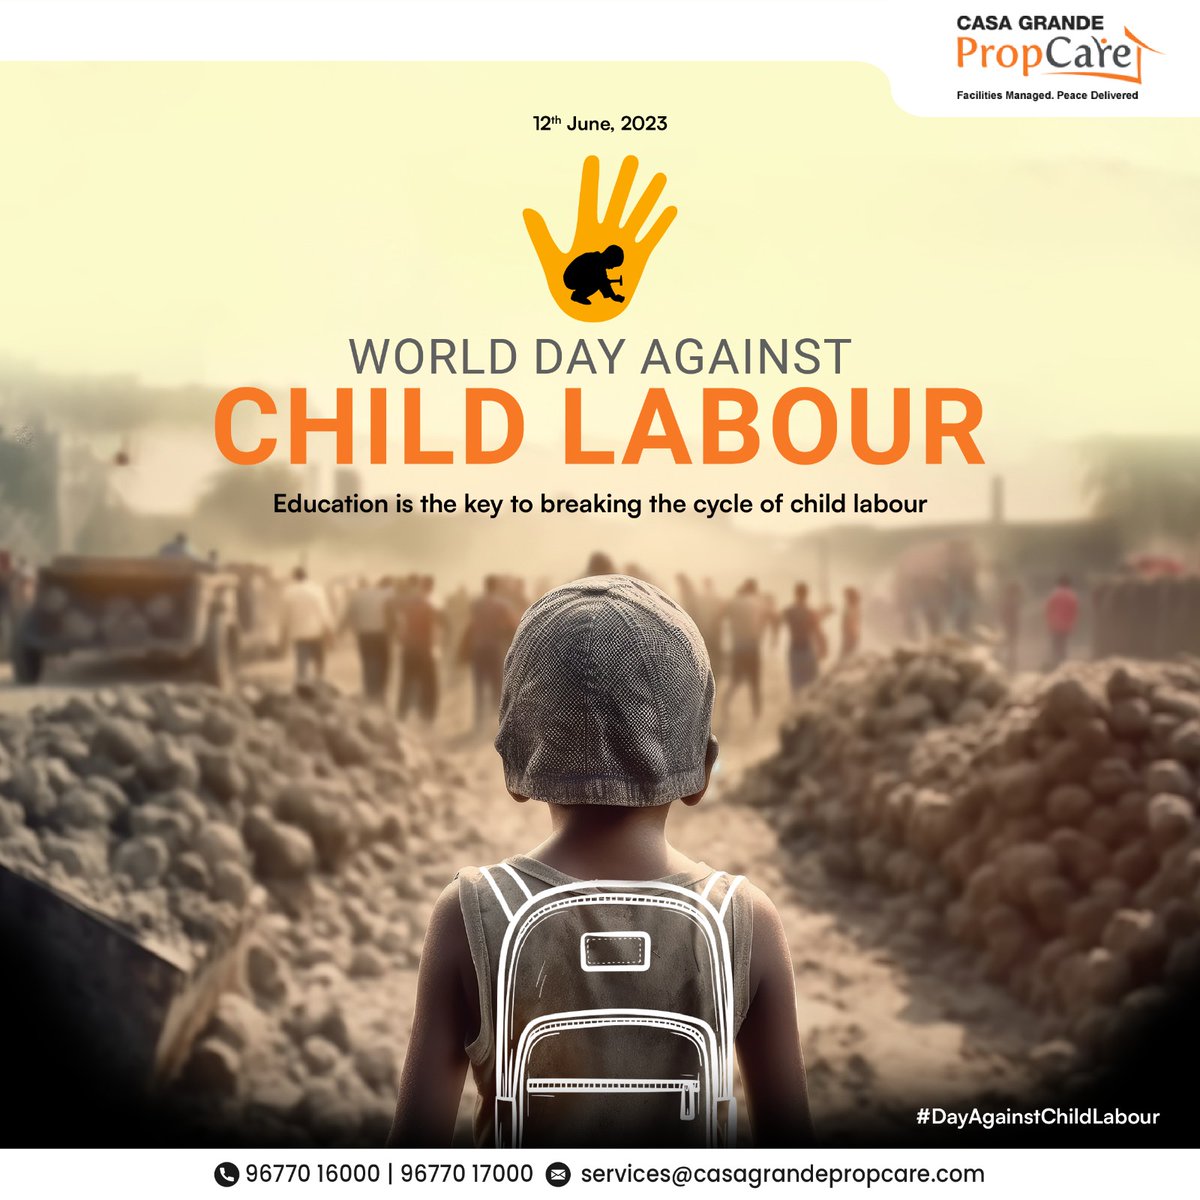 Every child deserves a childhood, not a burden. 💔✋ Join us in raising awareness and taking action against child labour on this World Day Against Child Labour. Let's work together to create a brighter future for every child. 🌟

#Casagrandepropcare #EndChildLabour